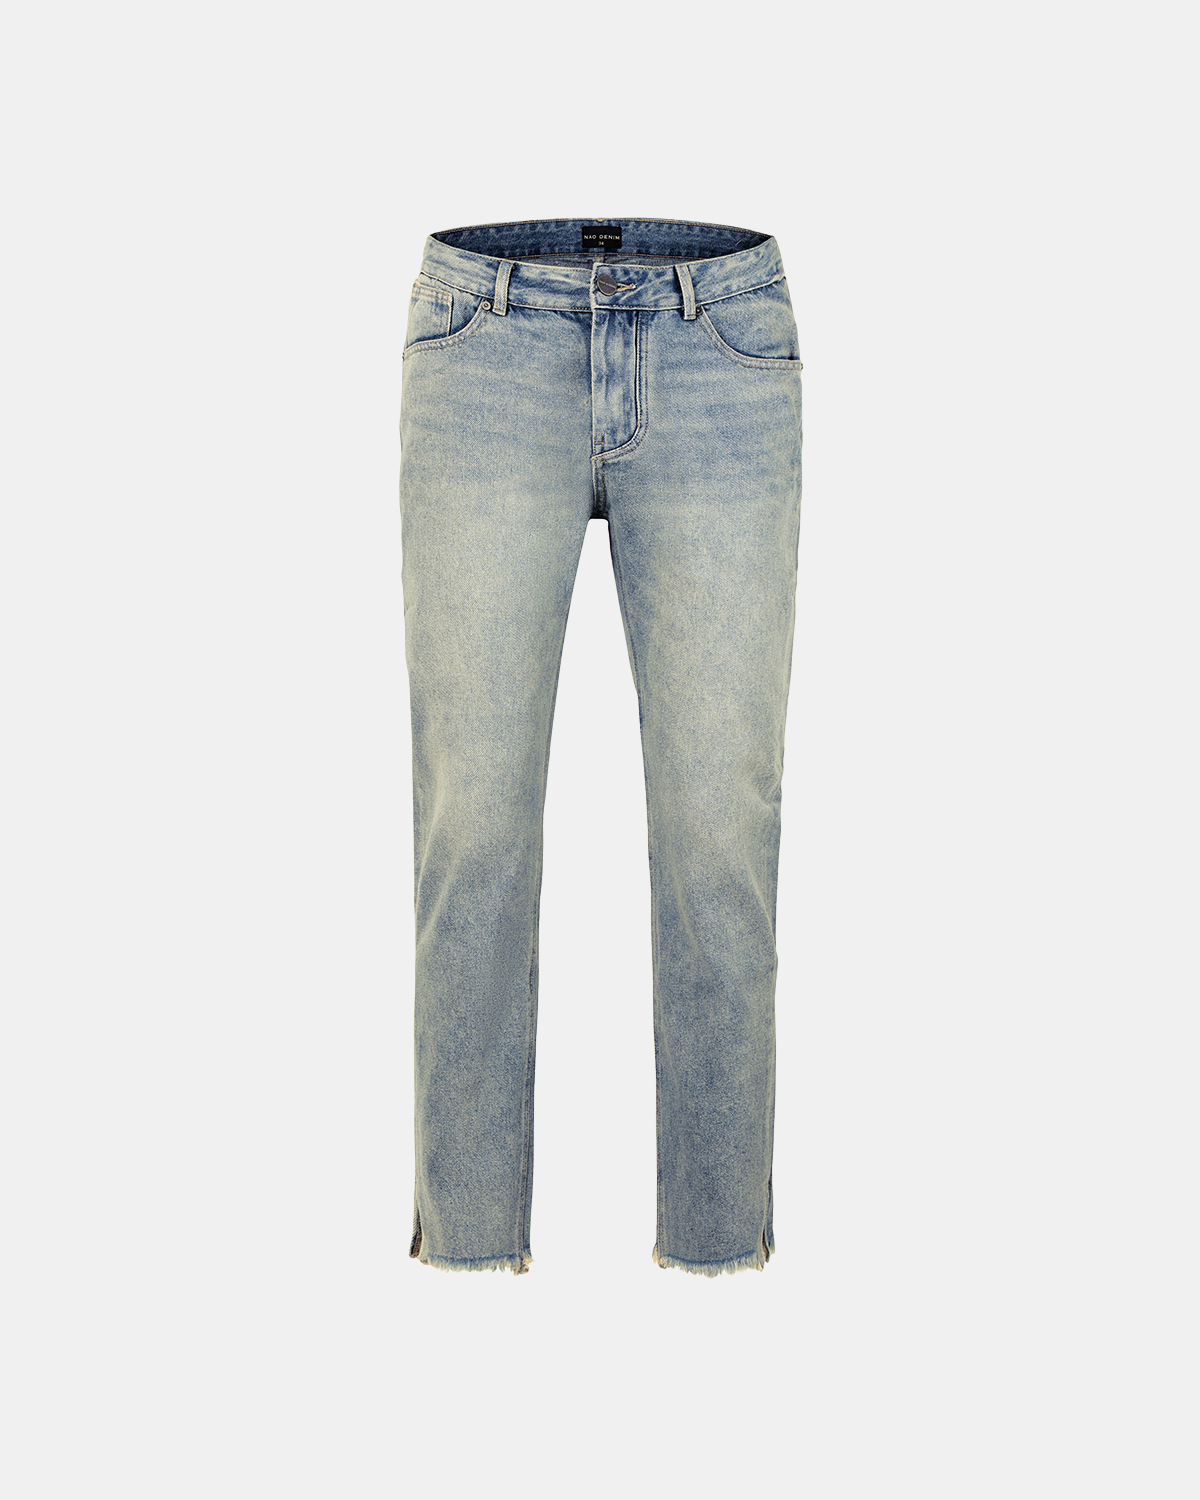  RL1 - RELAXED JEANS WITH SPLIT HEMS - MID BLUE 